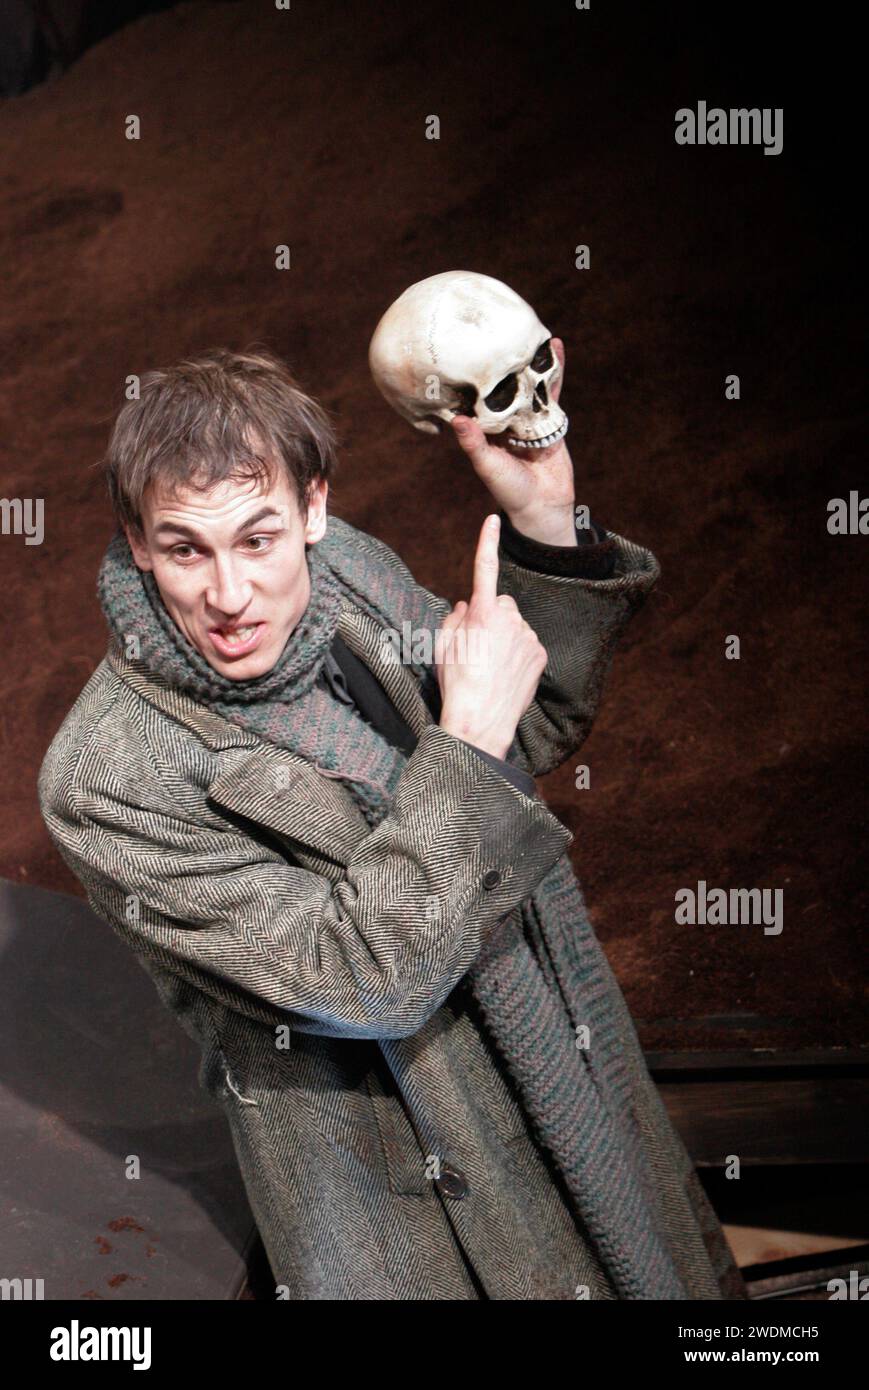 Tobias Menzies (Hamlet) with Yorick) in HAMLET by Shakespeare at the Royal Theatre, Northampton, England  22/03/2005  design: Laura Hopkins  lighting: Mark Jonathan  fights: Terry King  director: Rupert Goold Stock Photo